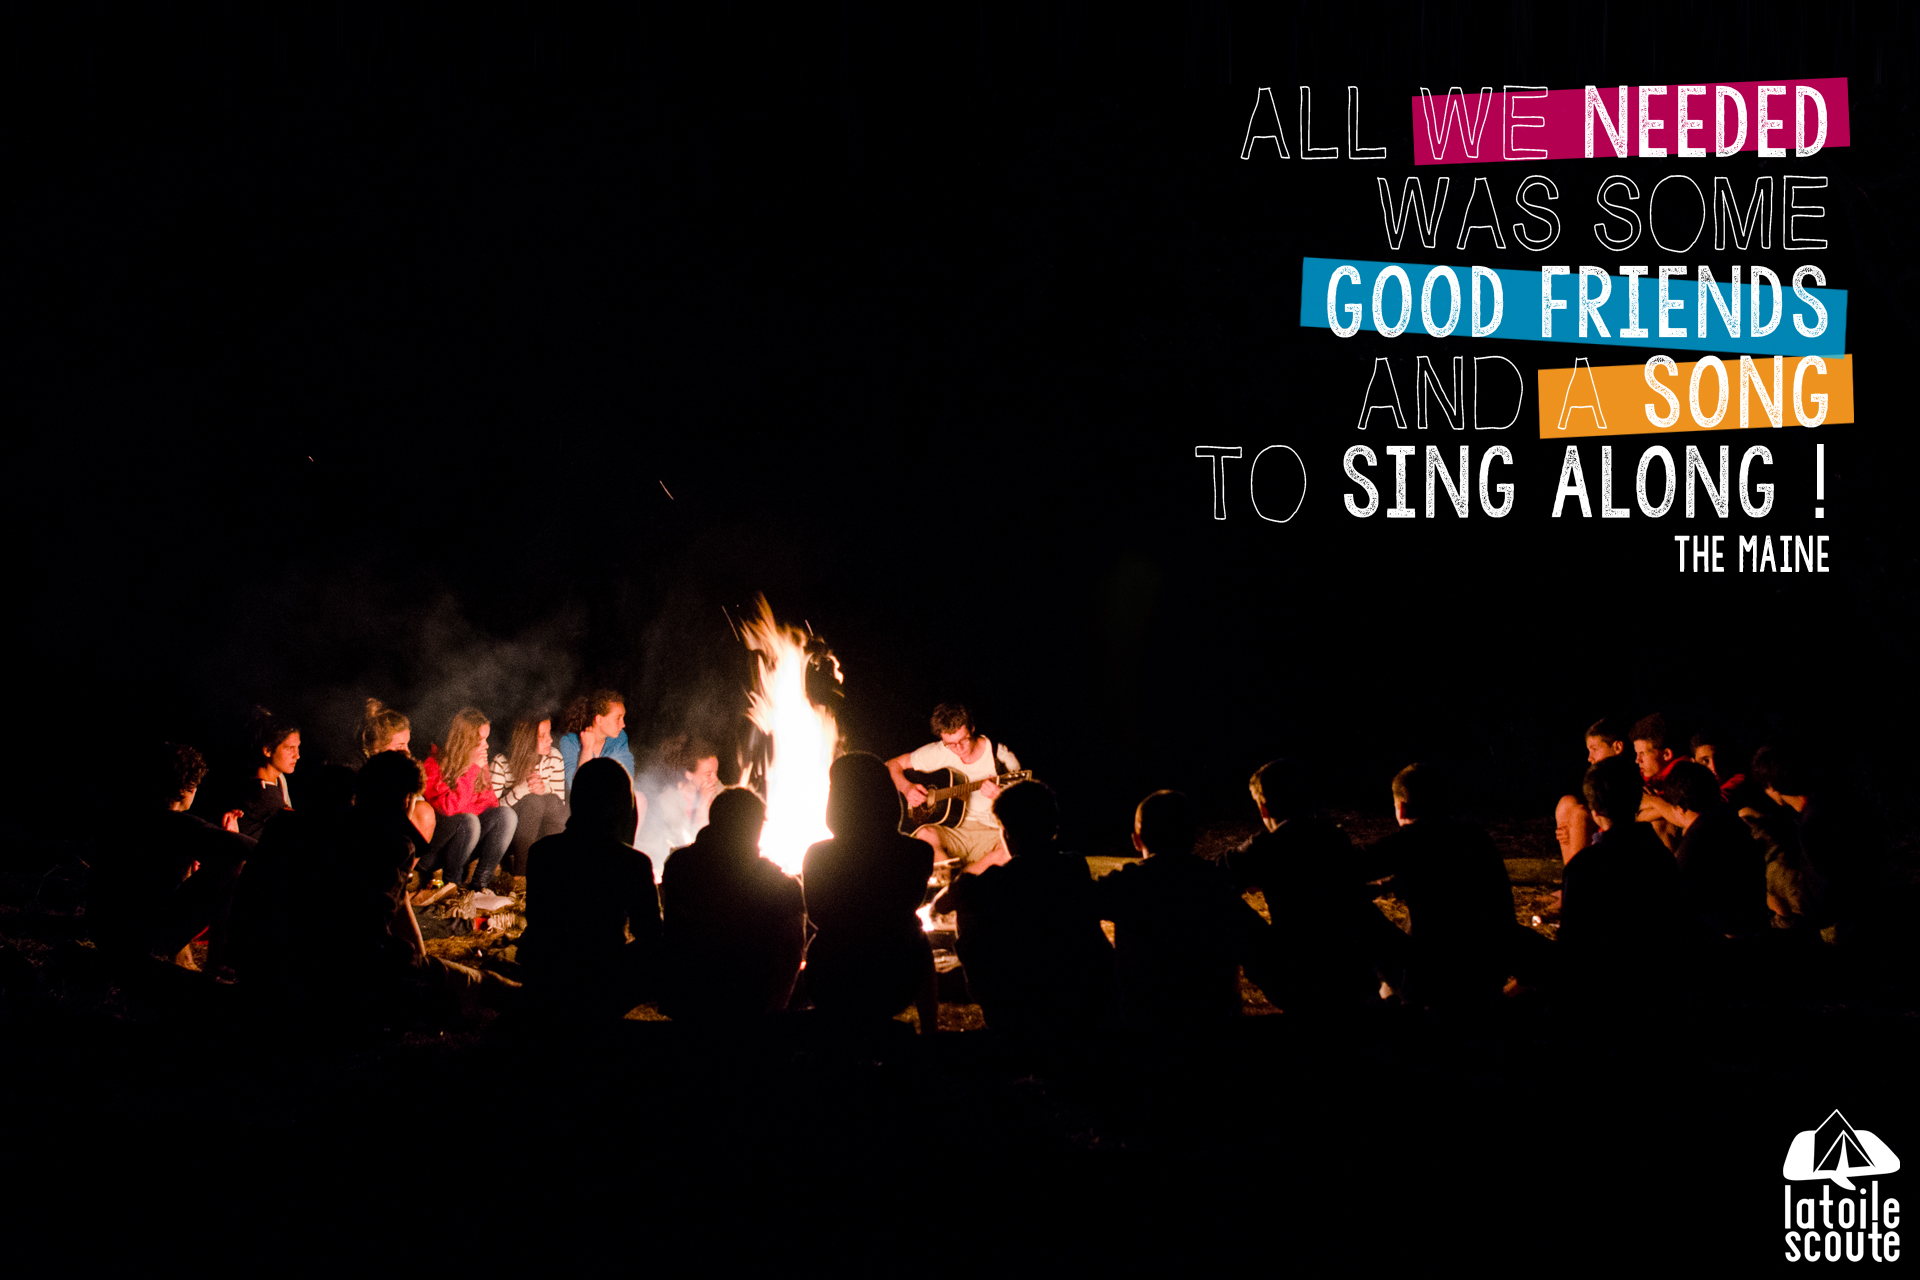 All we needed was some good friends, and a song to sing along !